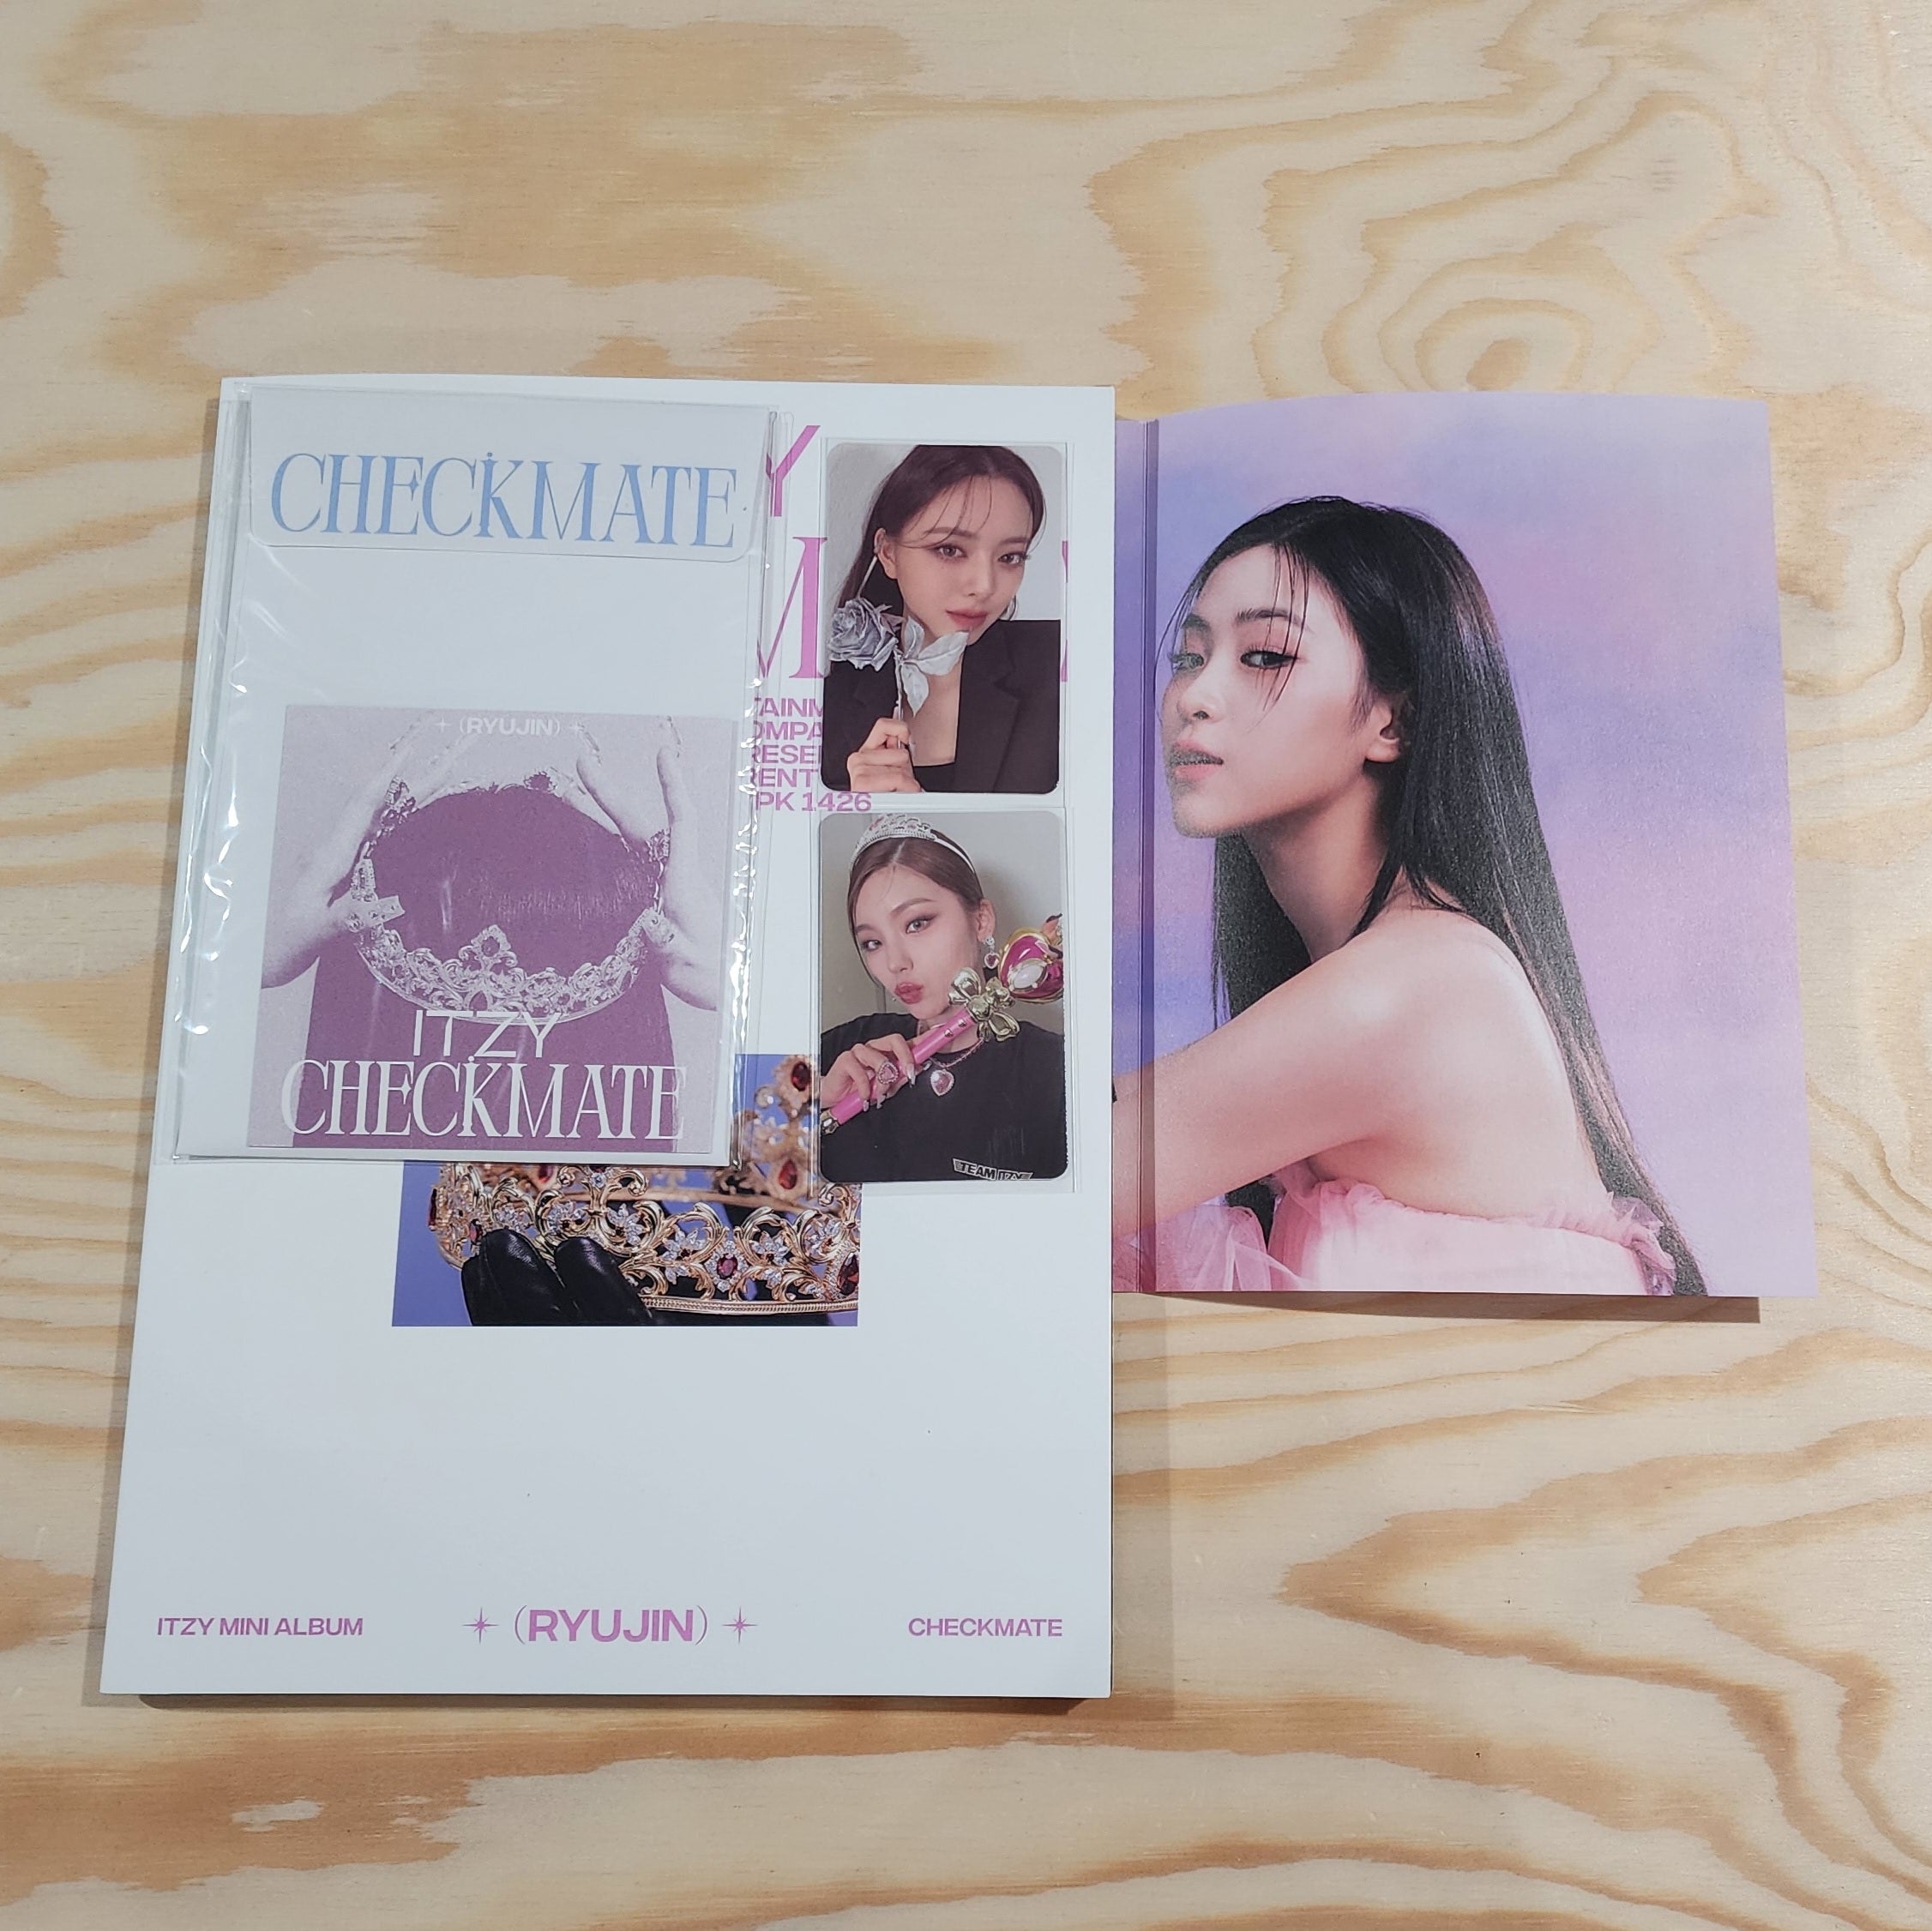 ITZY - CHECKMATE [Standard Edition]